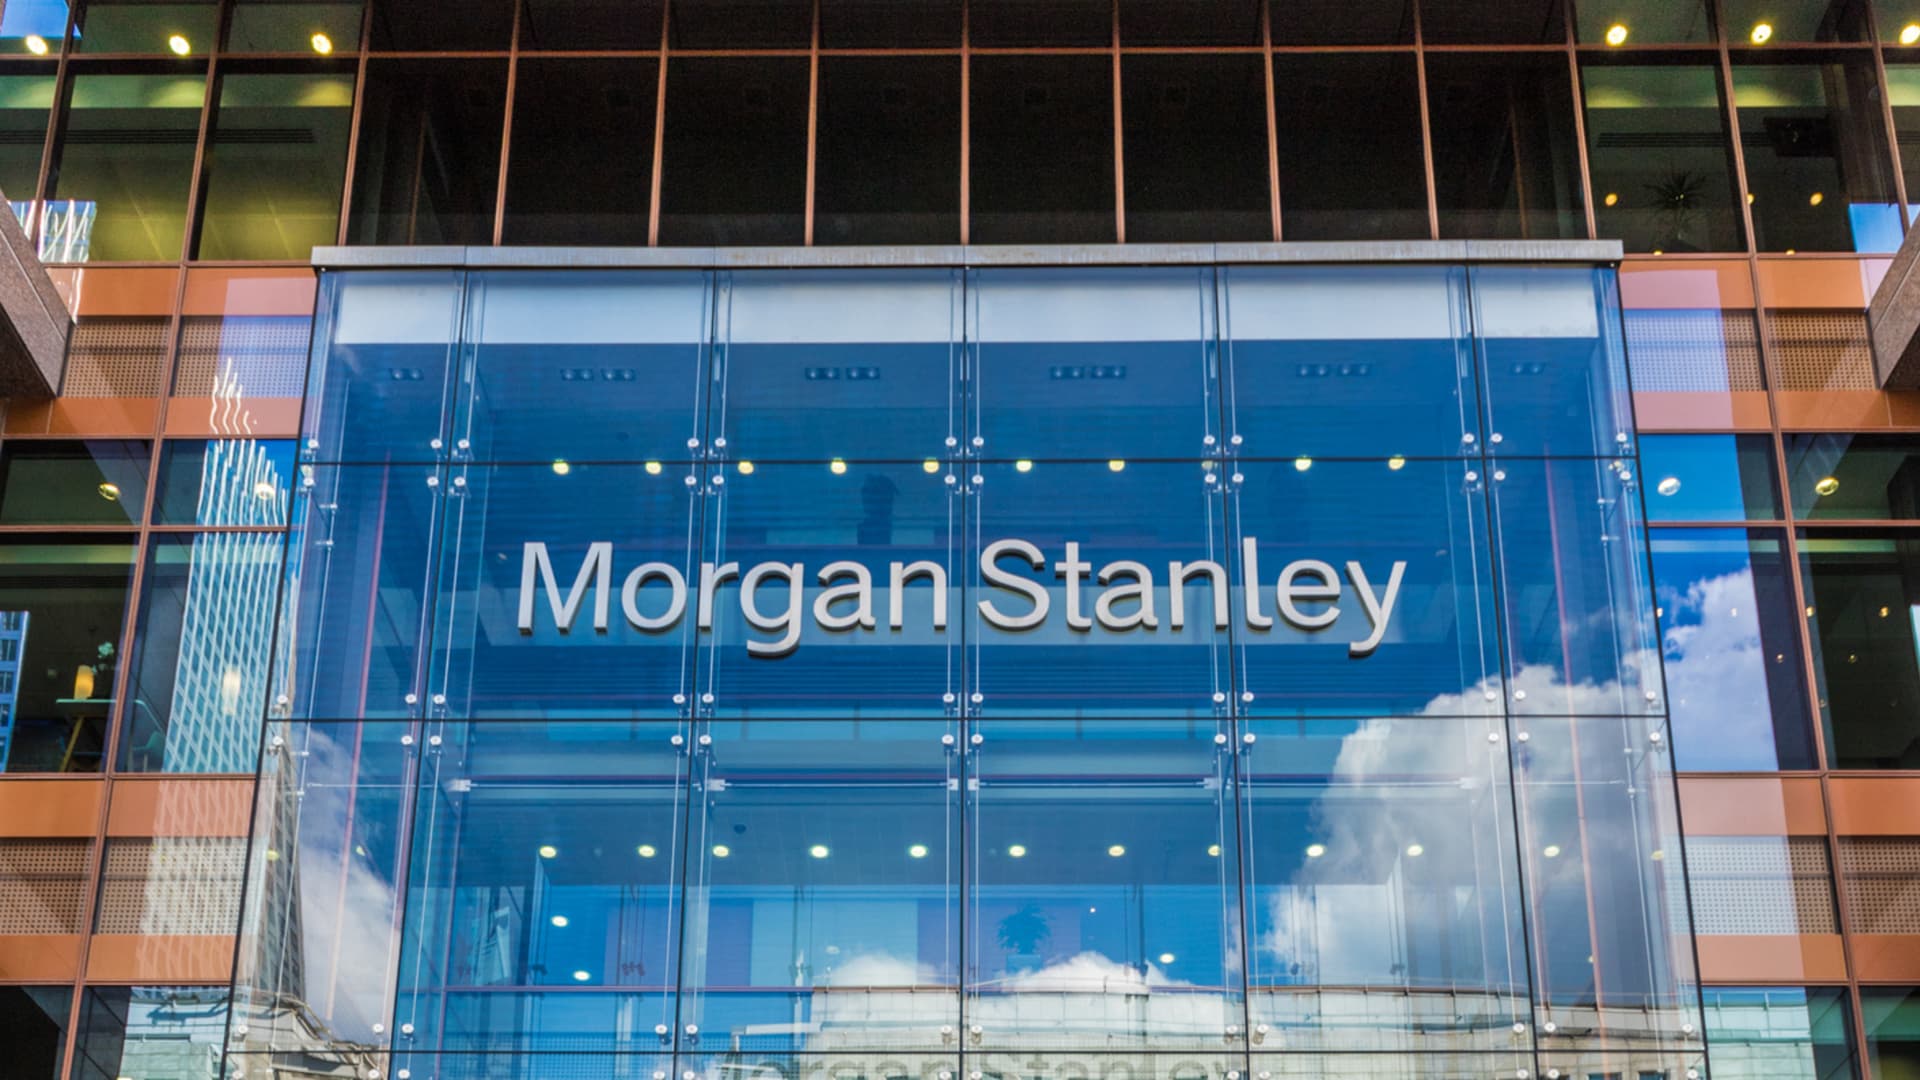 A view of the Morgan Stanley offices in Canary Wharf, London, U.K.